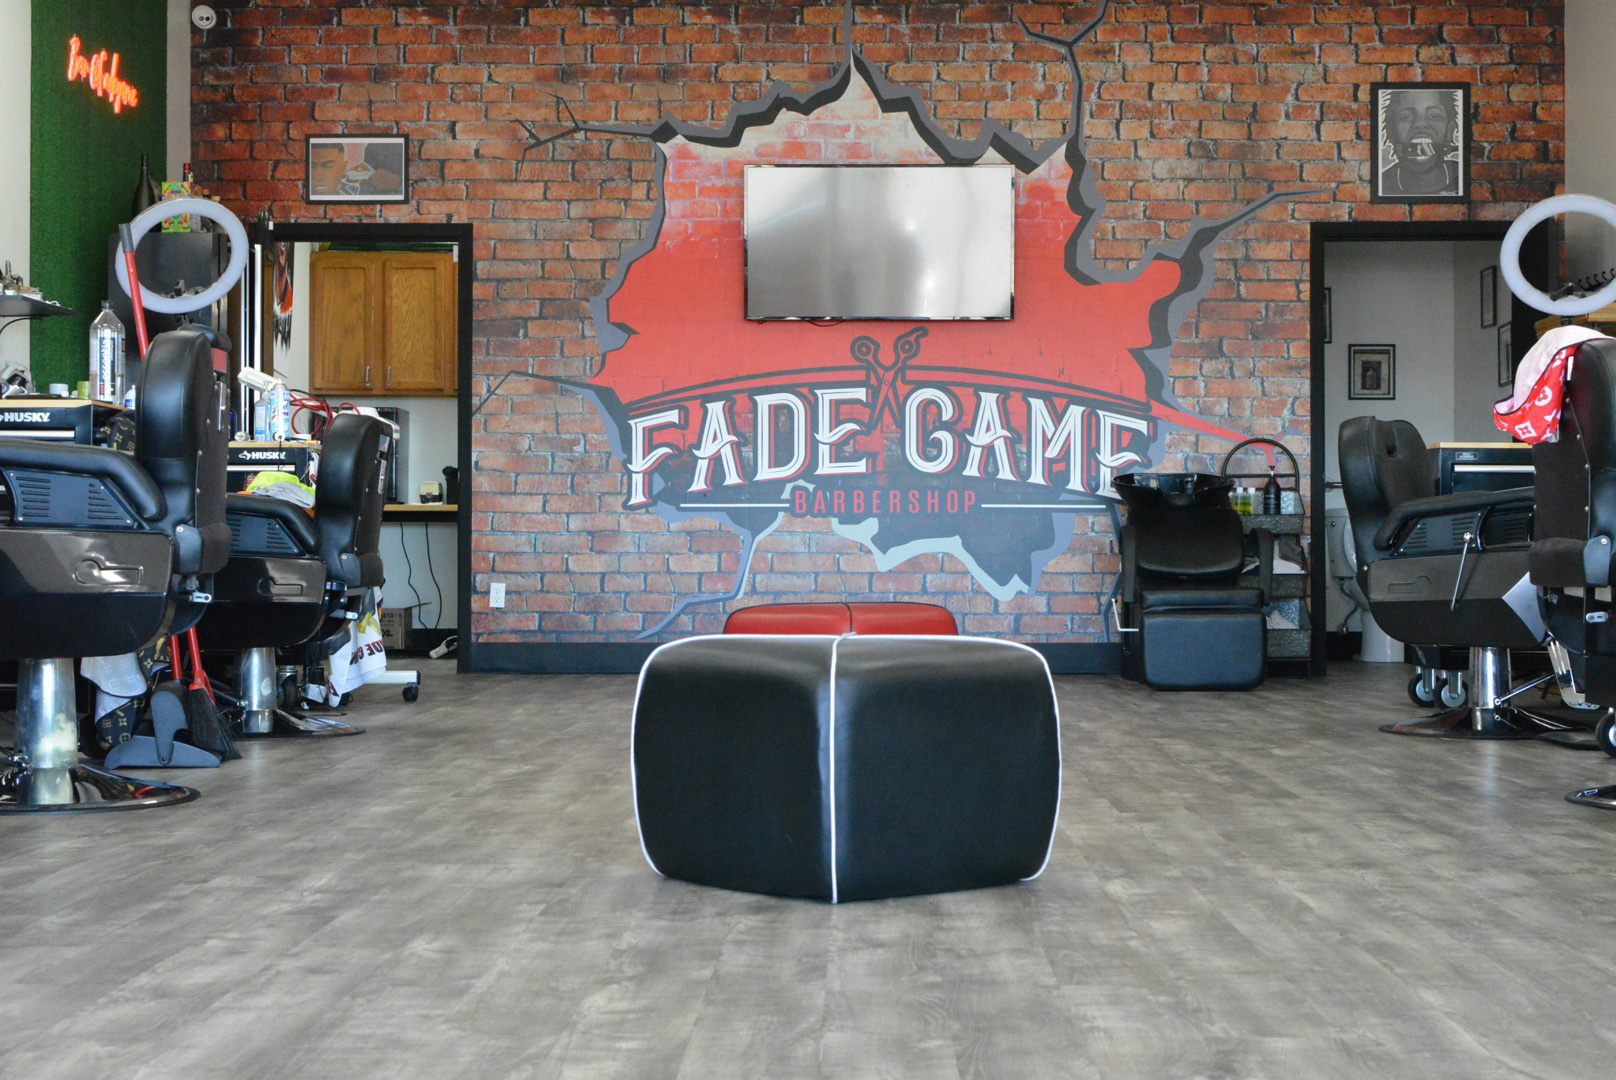 In The Game barbershop